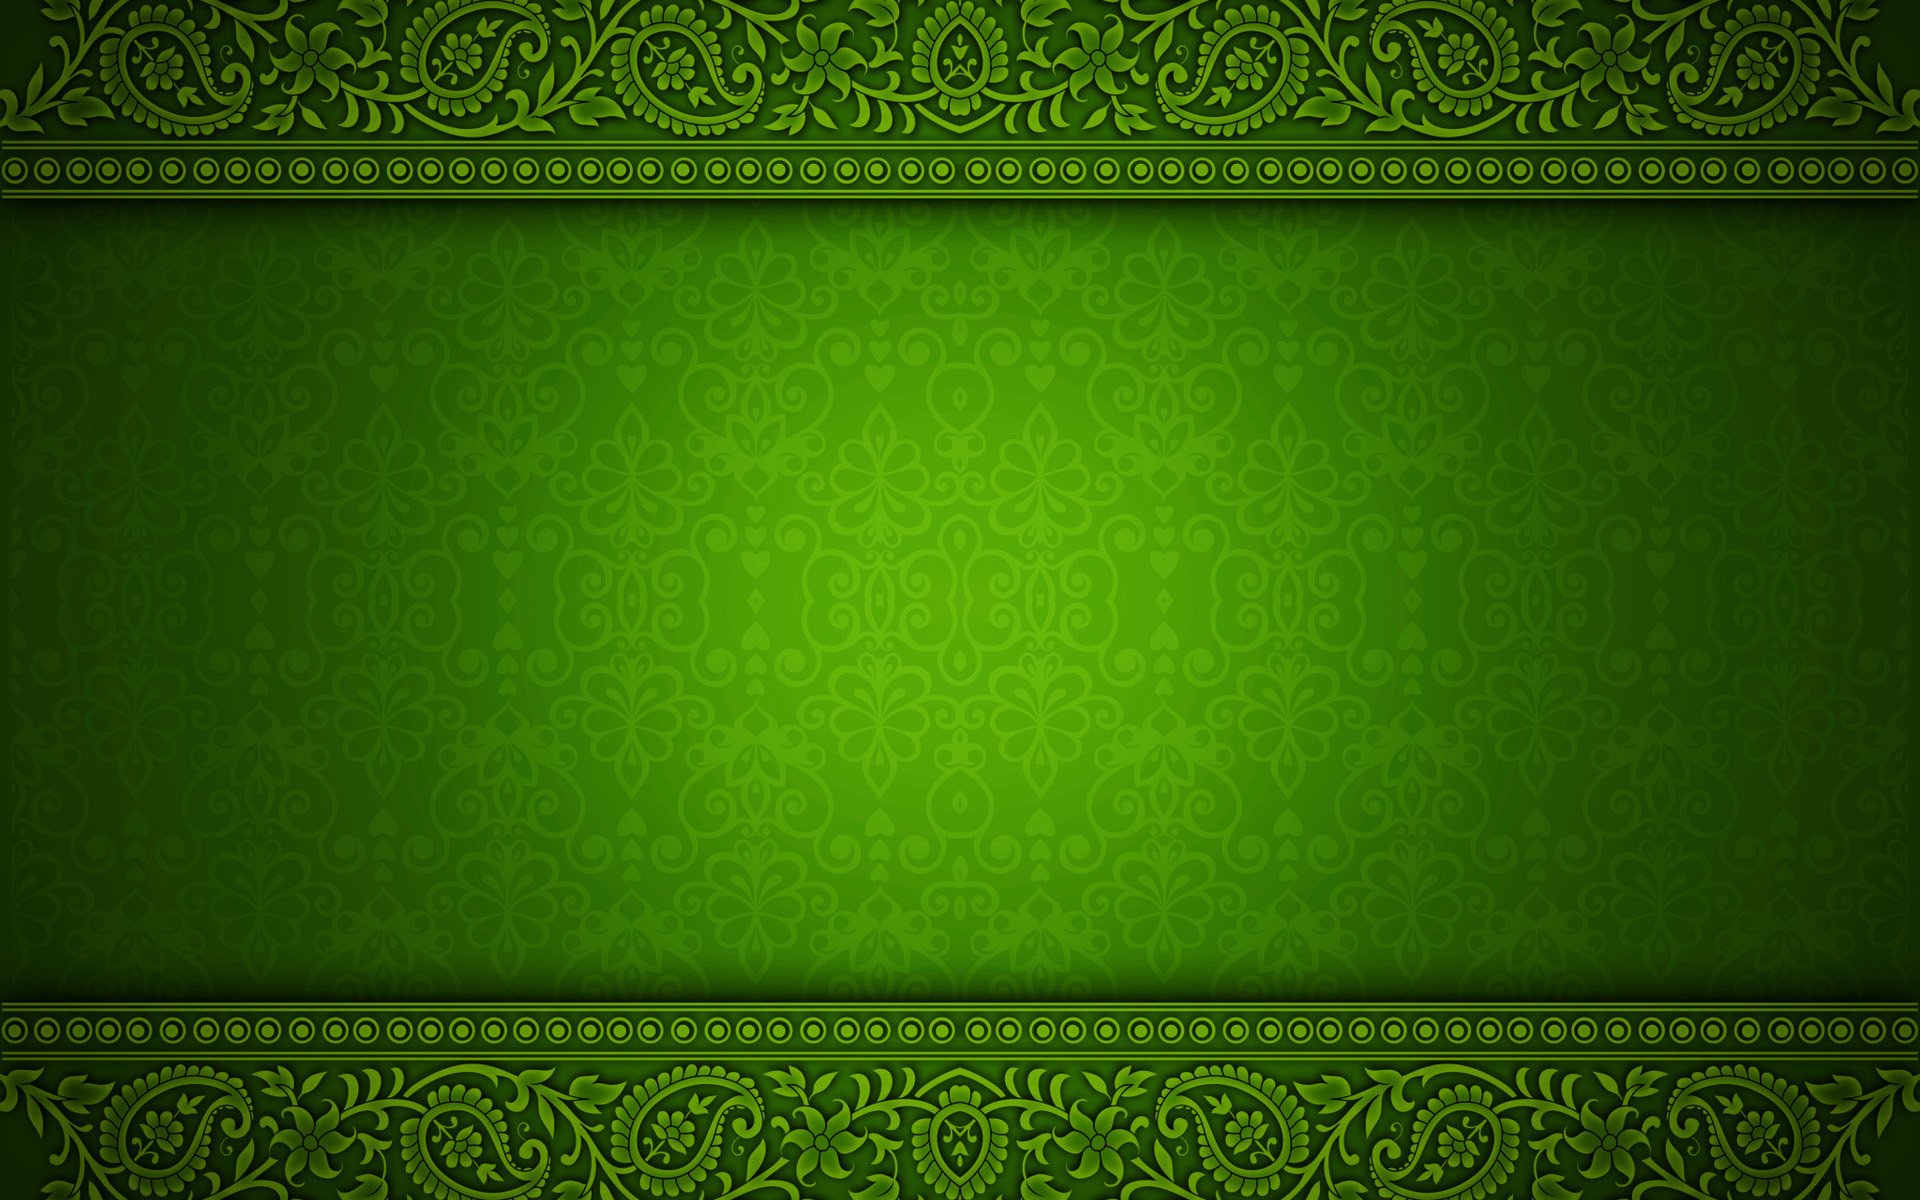 Download wallpapers green floral pattern, green vintage background, floral  patterns, vintage backgrounds, green retro backgrounds, floral vintage  pattern, green floral backgrounds for desktop with resolution 1920x1200.  High Quality HD pictures wallpapers